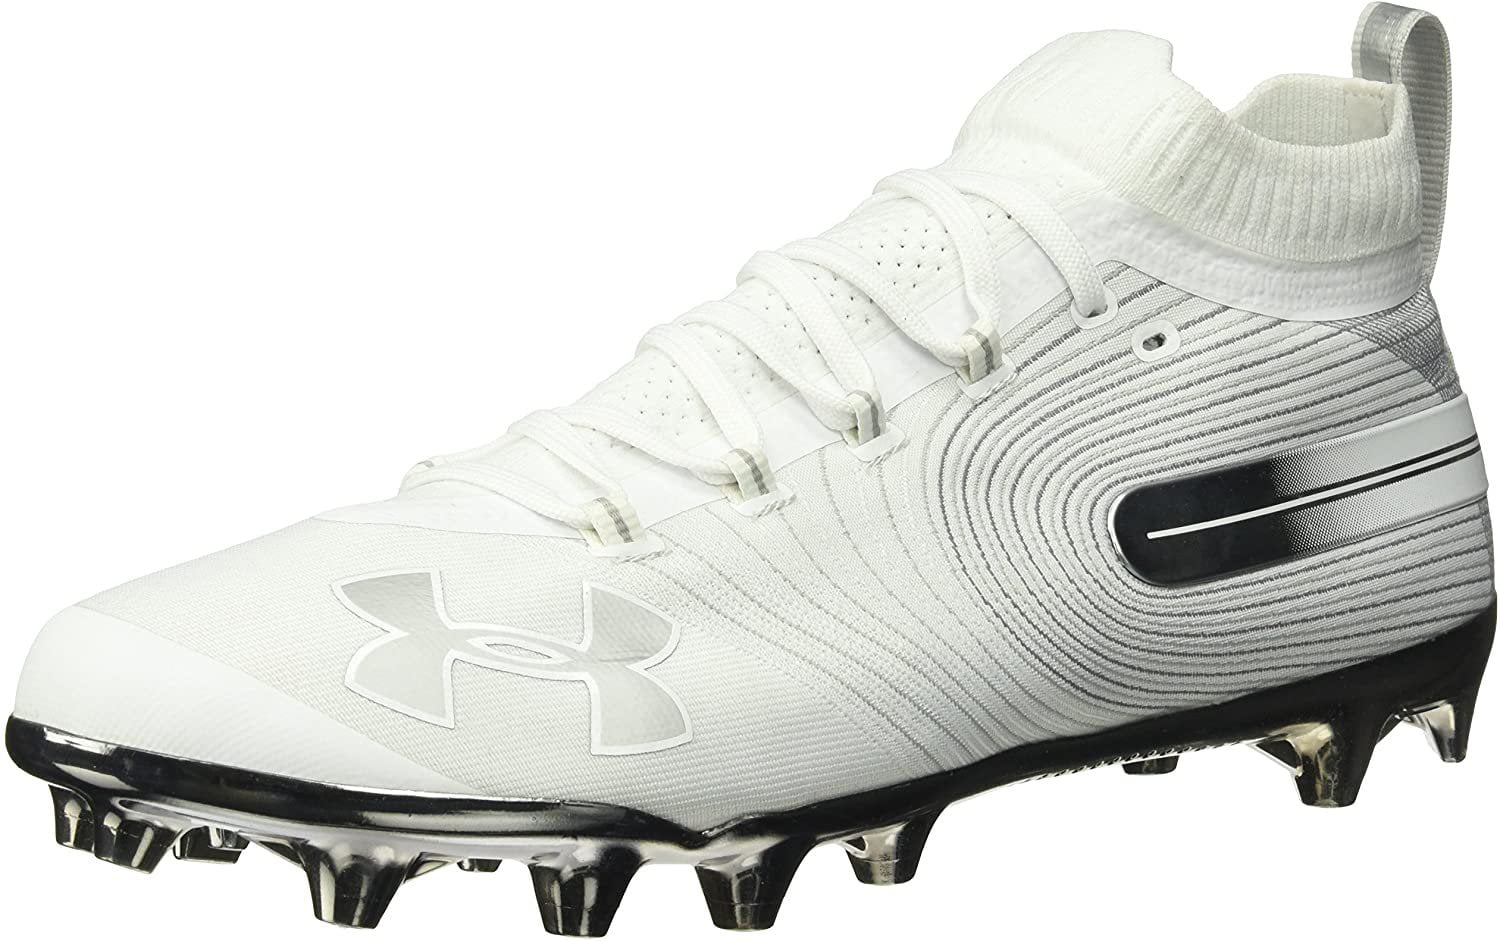 Details about   Under Armour Football Cleats Men's Spotlight Molded Sports Shoes 3020675 